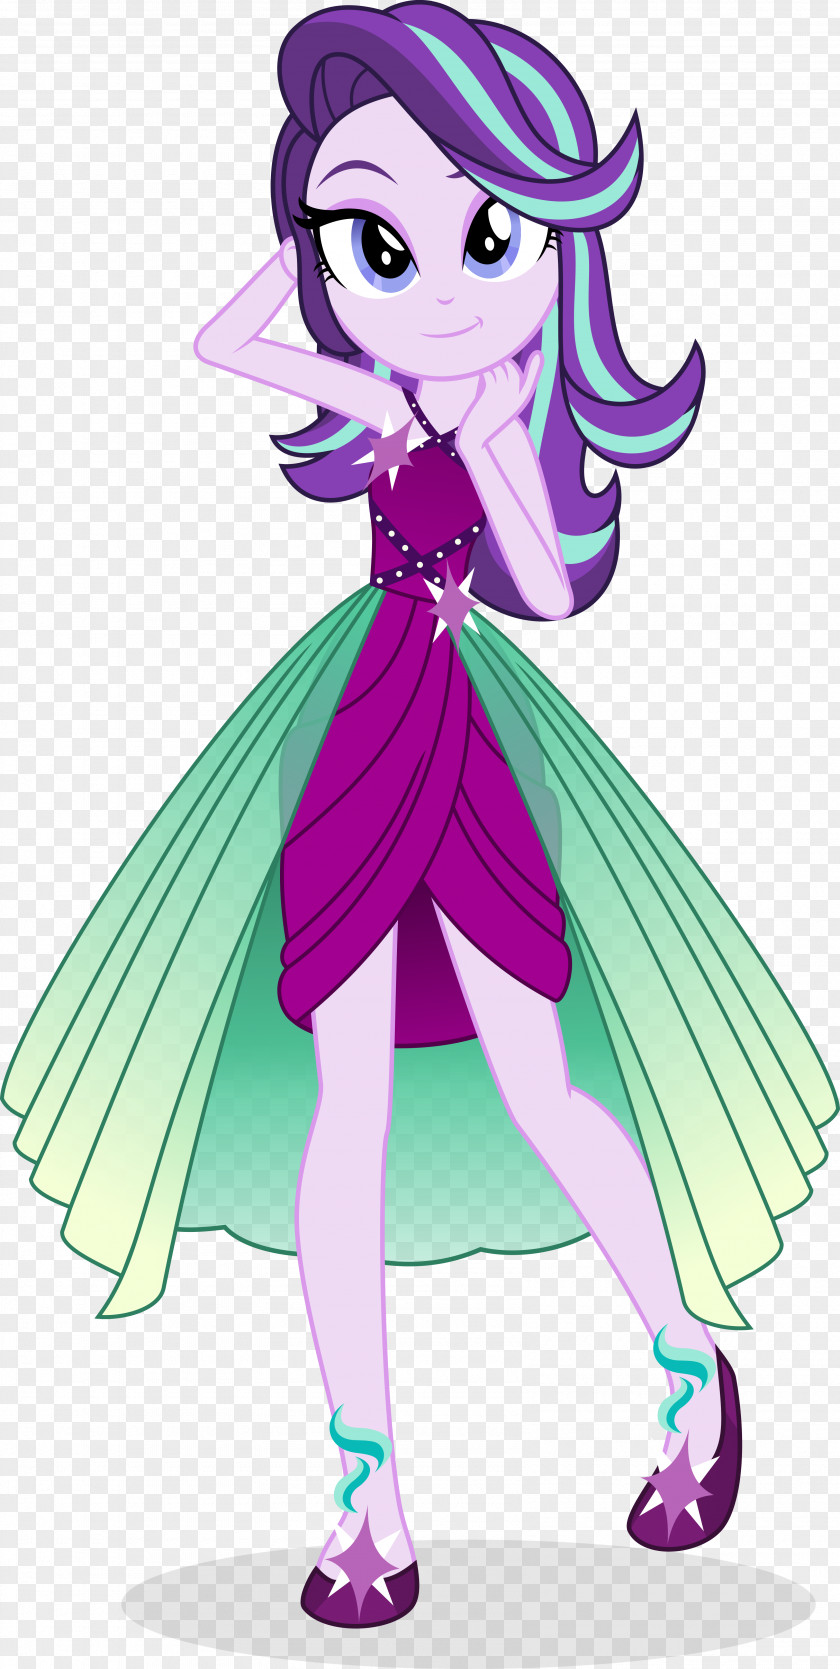 My Little Pony Equestria Spike Twilight Sparkle Rarity Pony: Girls Image PNG